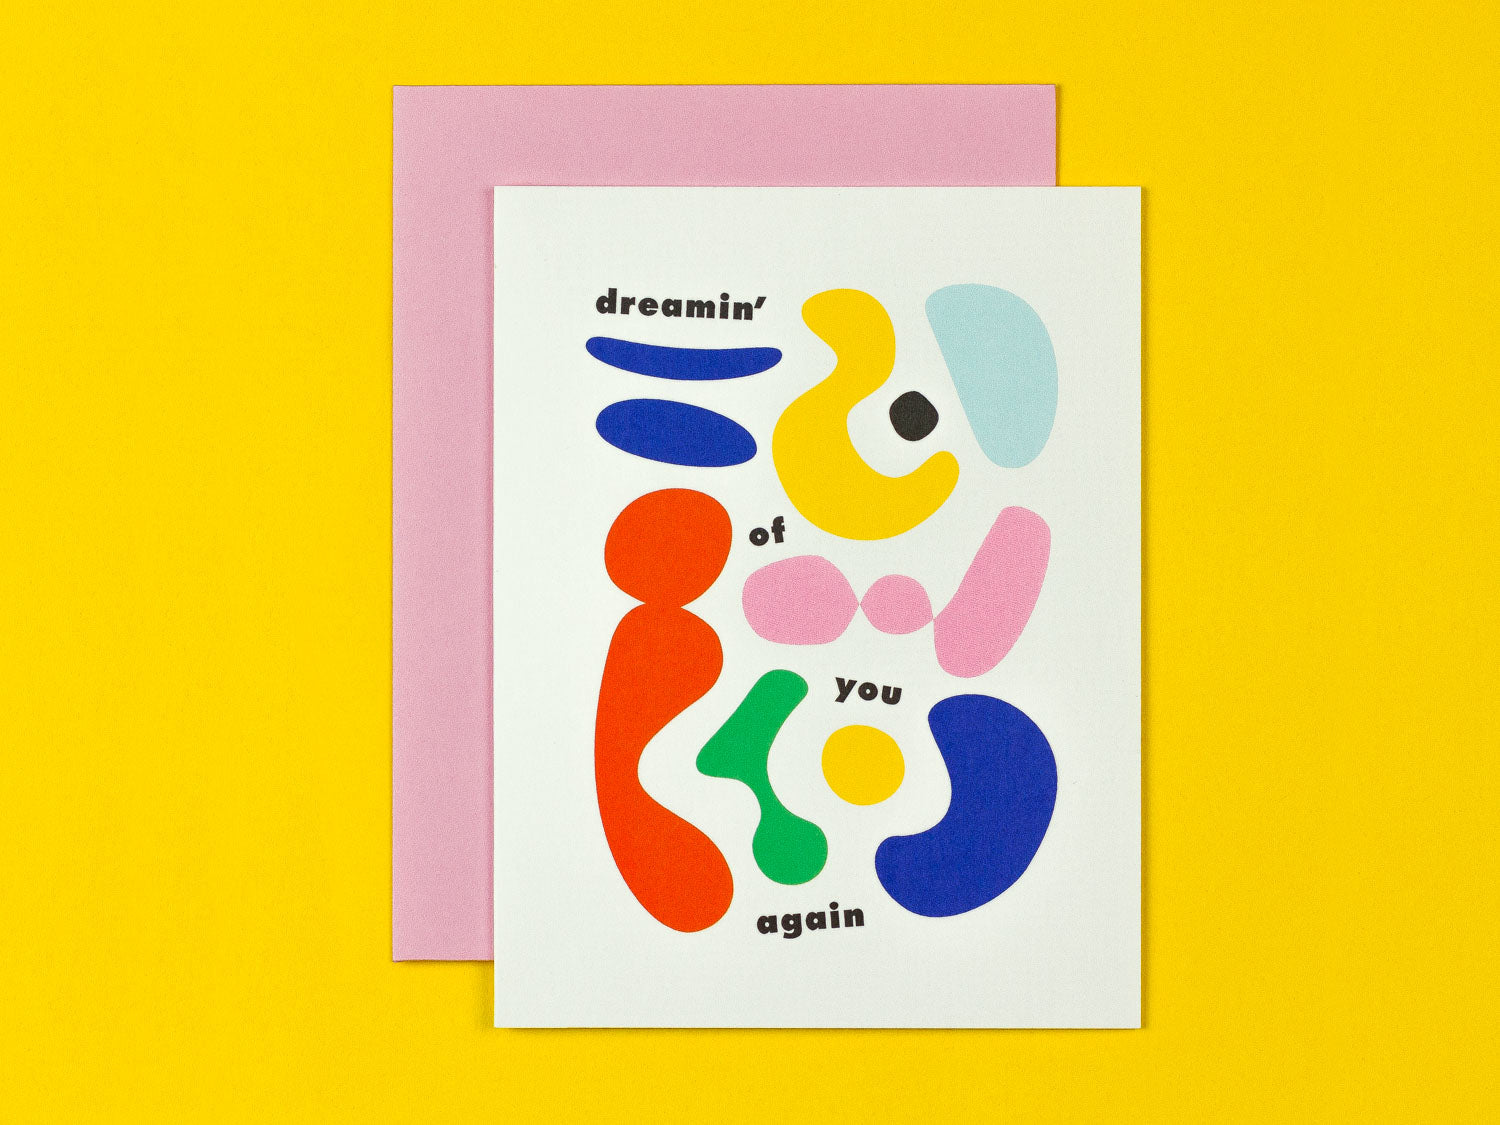 Dreamin' of You Again love card with colorful abstract shapes by @mydarlin_bk